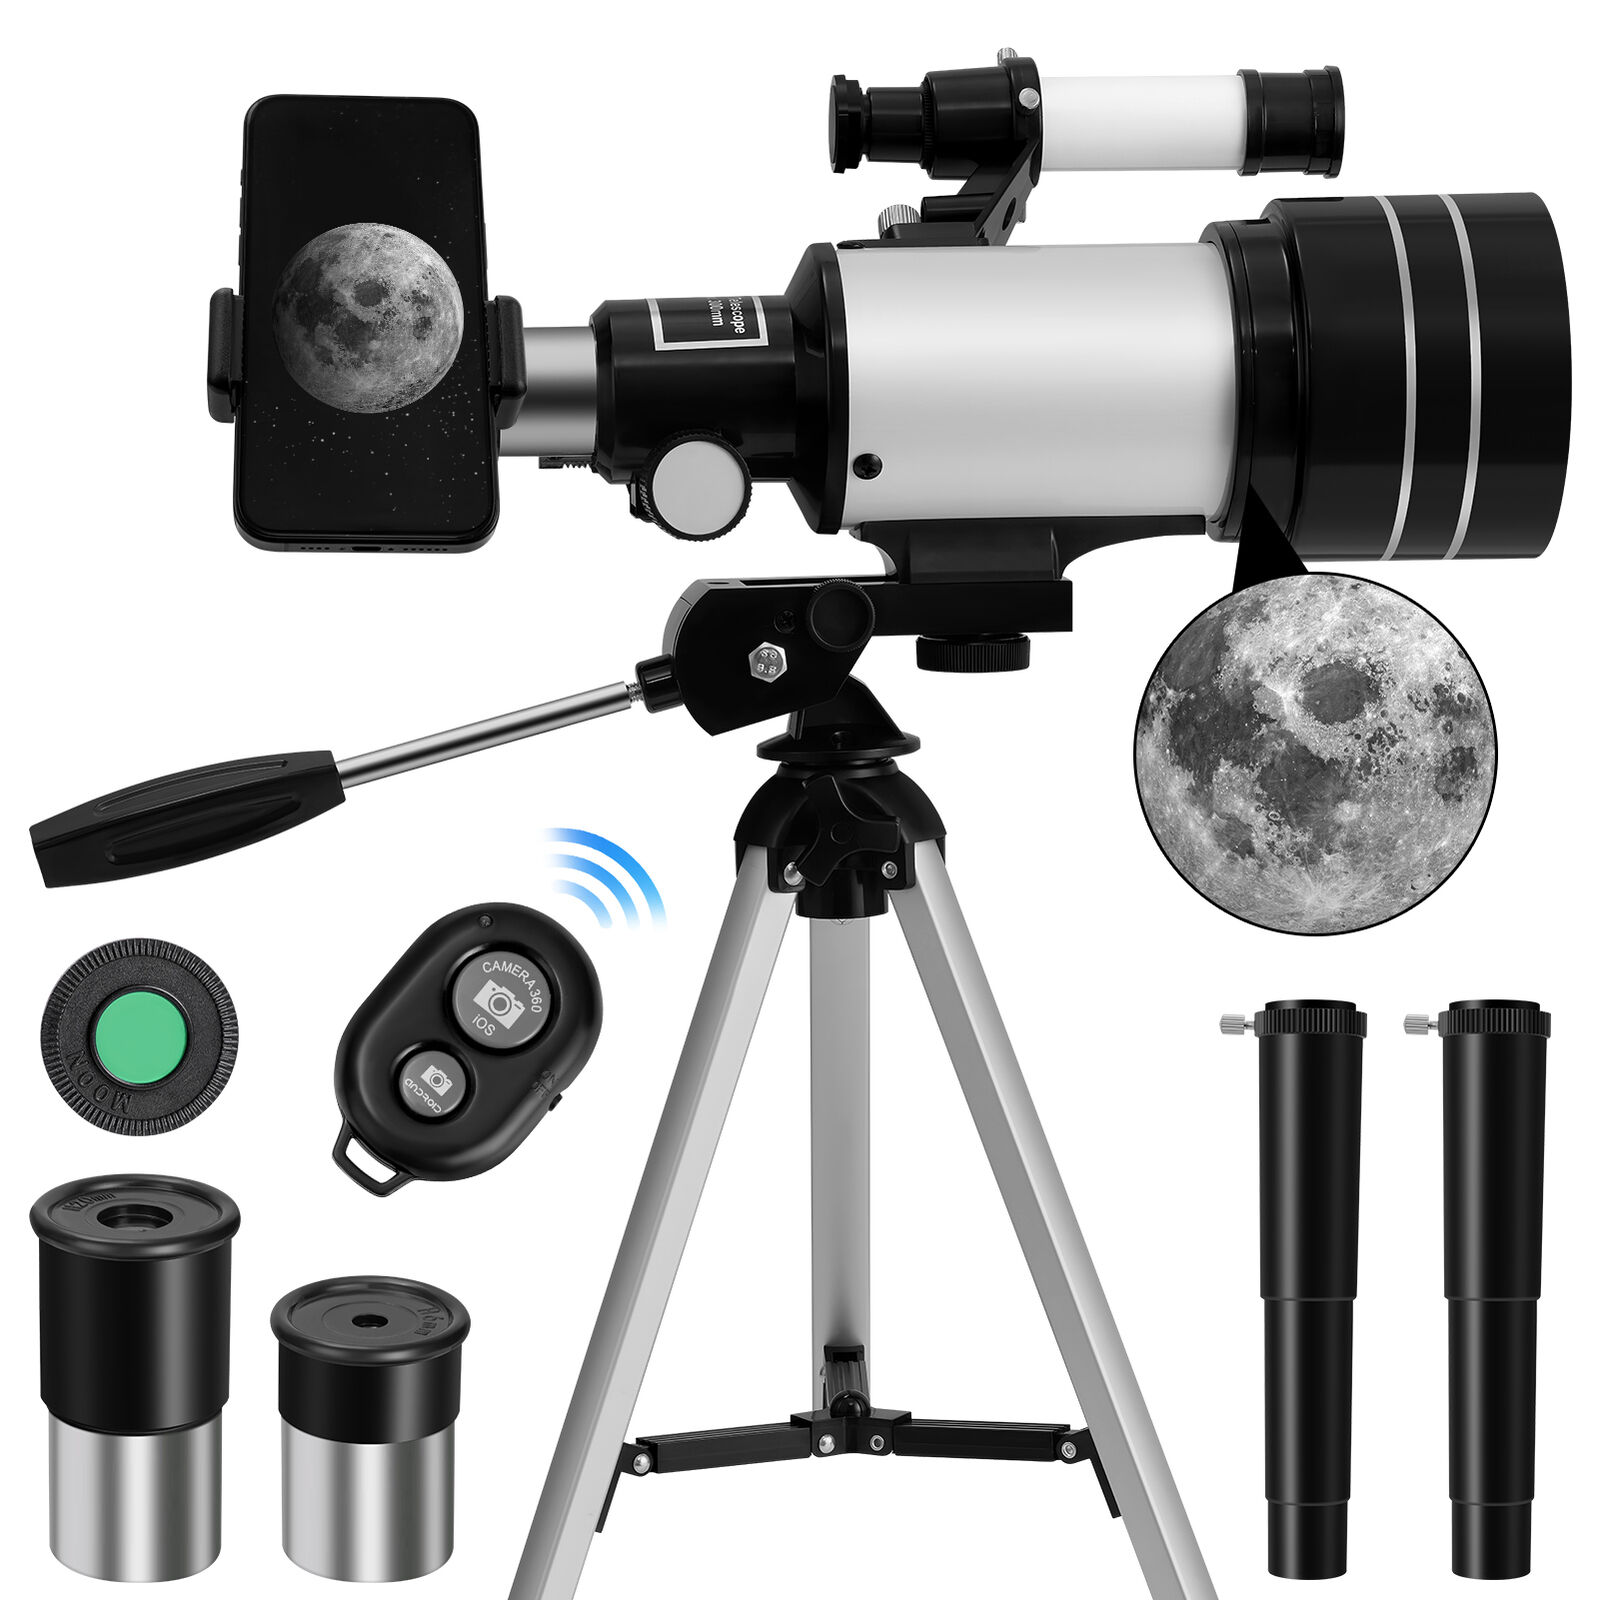 Professional Astronomical Telescope Night Vision For HD Viewing Space Star Moon